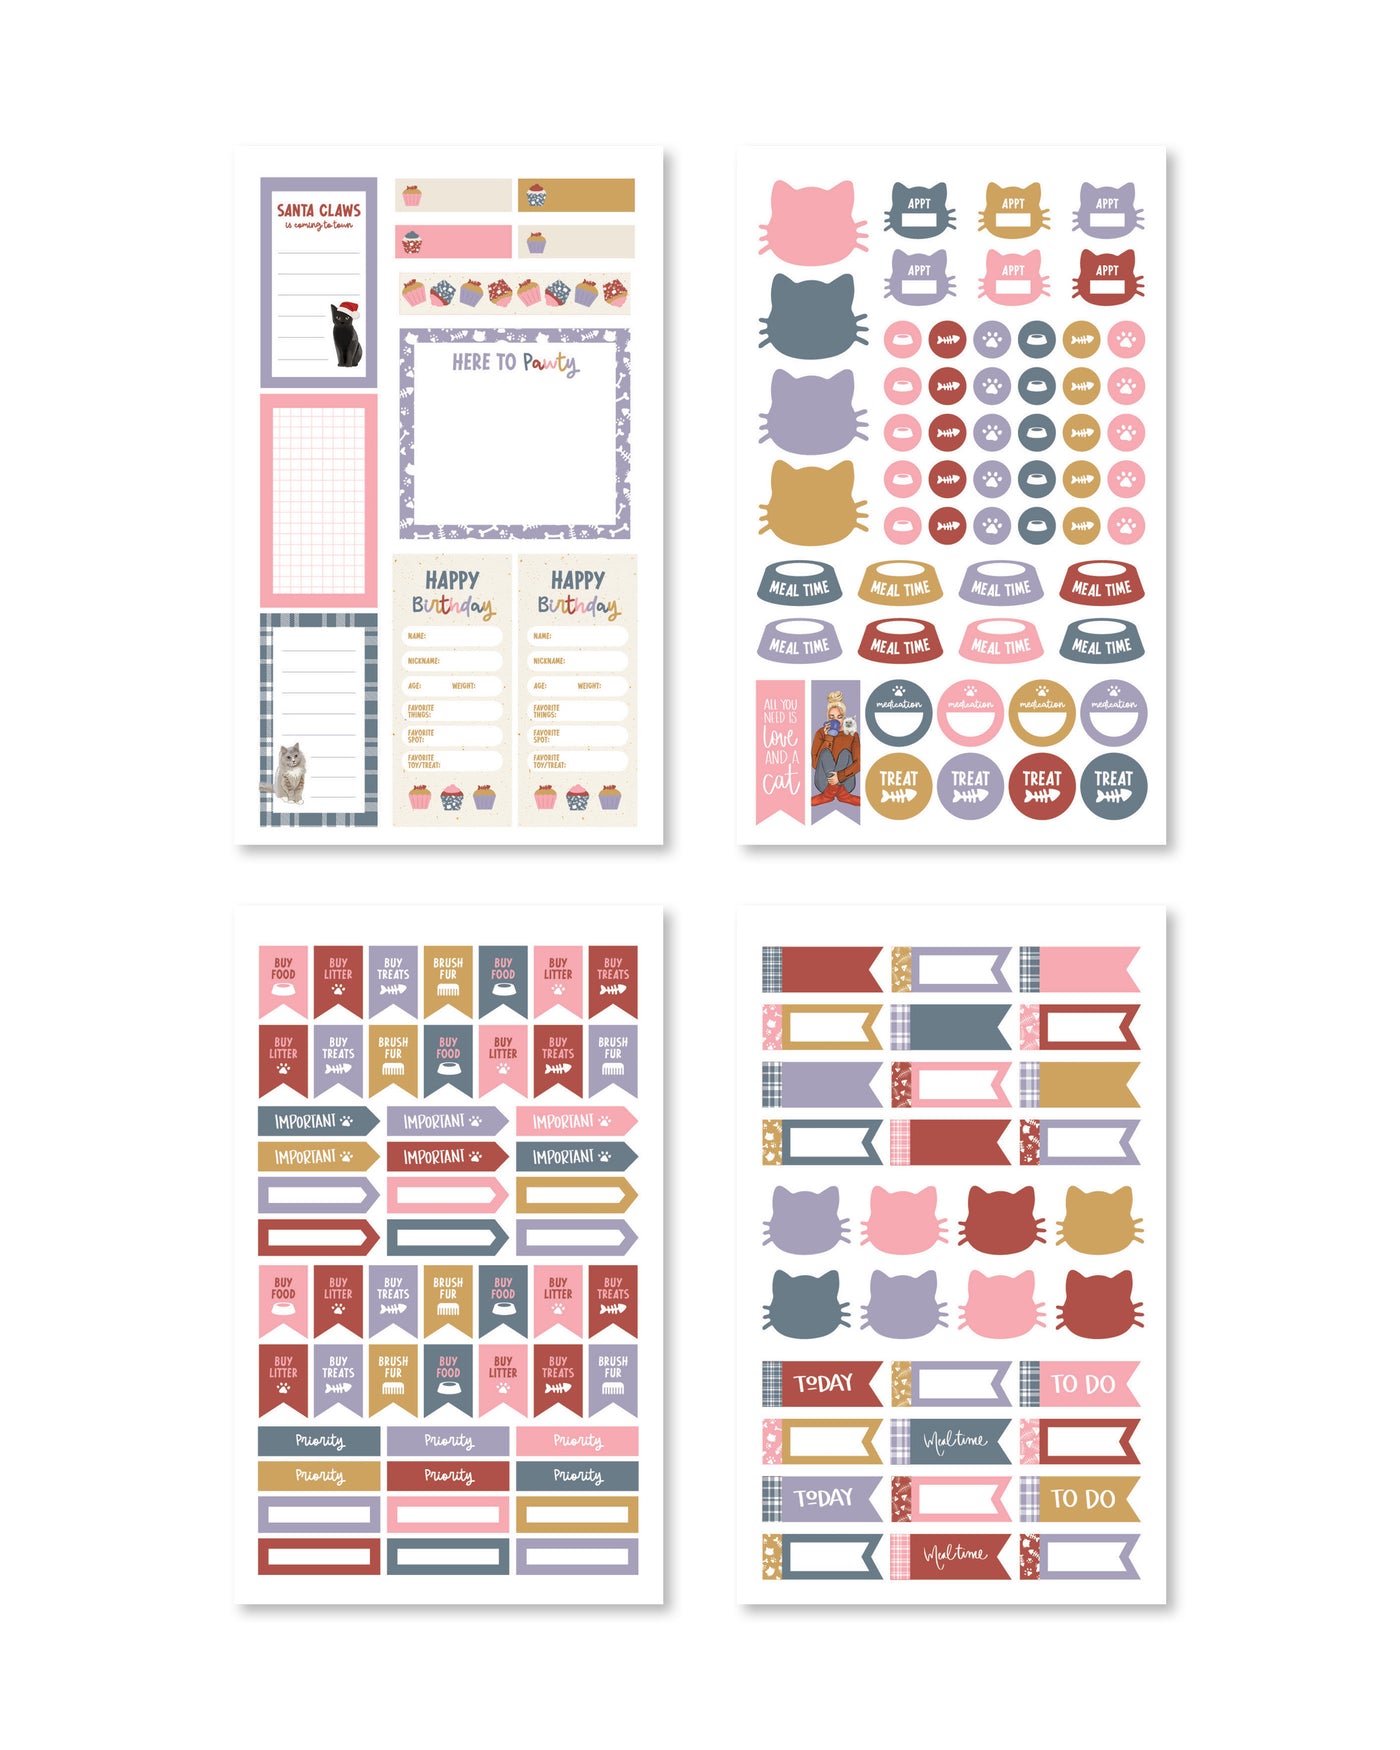 Cat mom planner stickers - Kitten Purrito Stickers – The Planner's